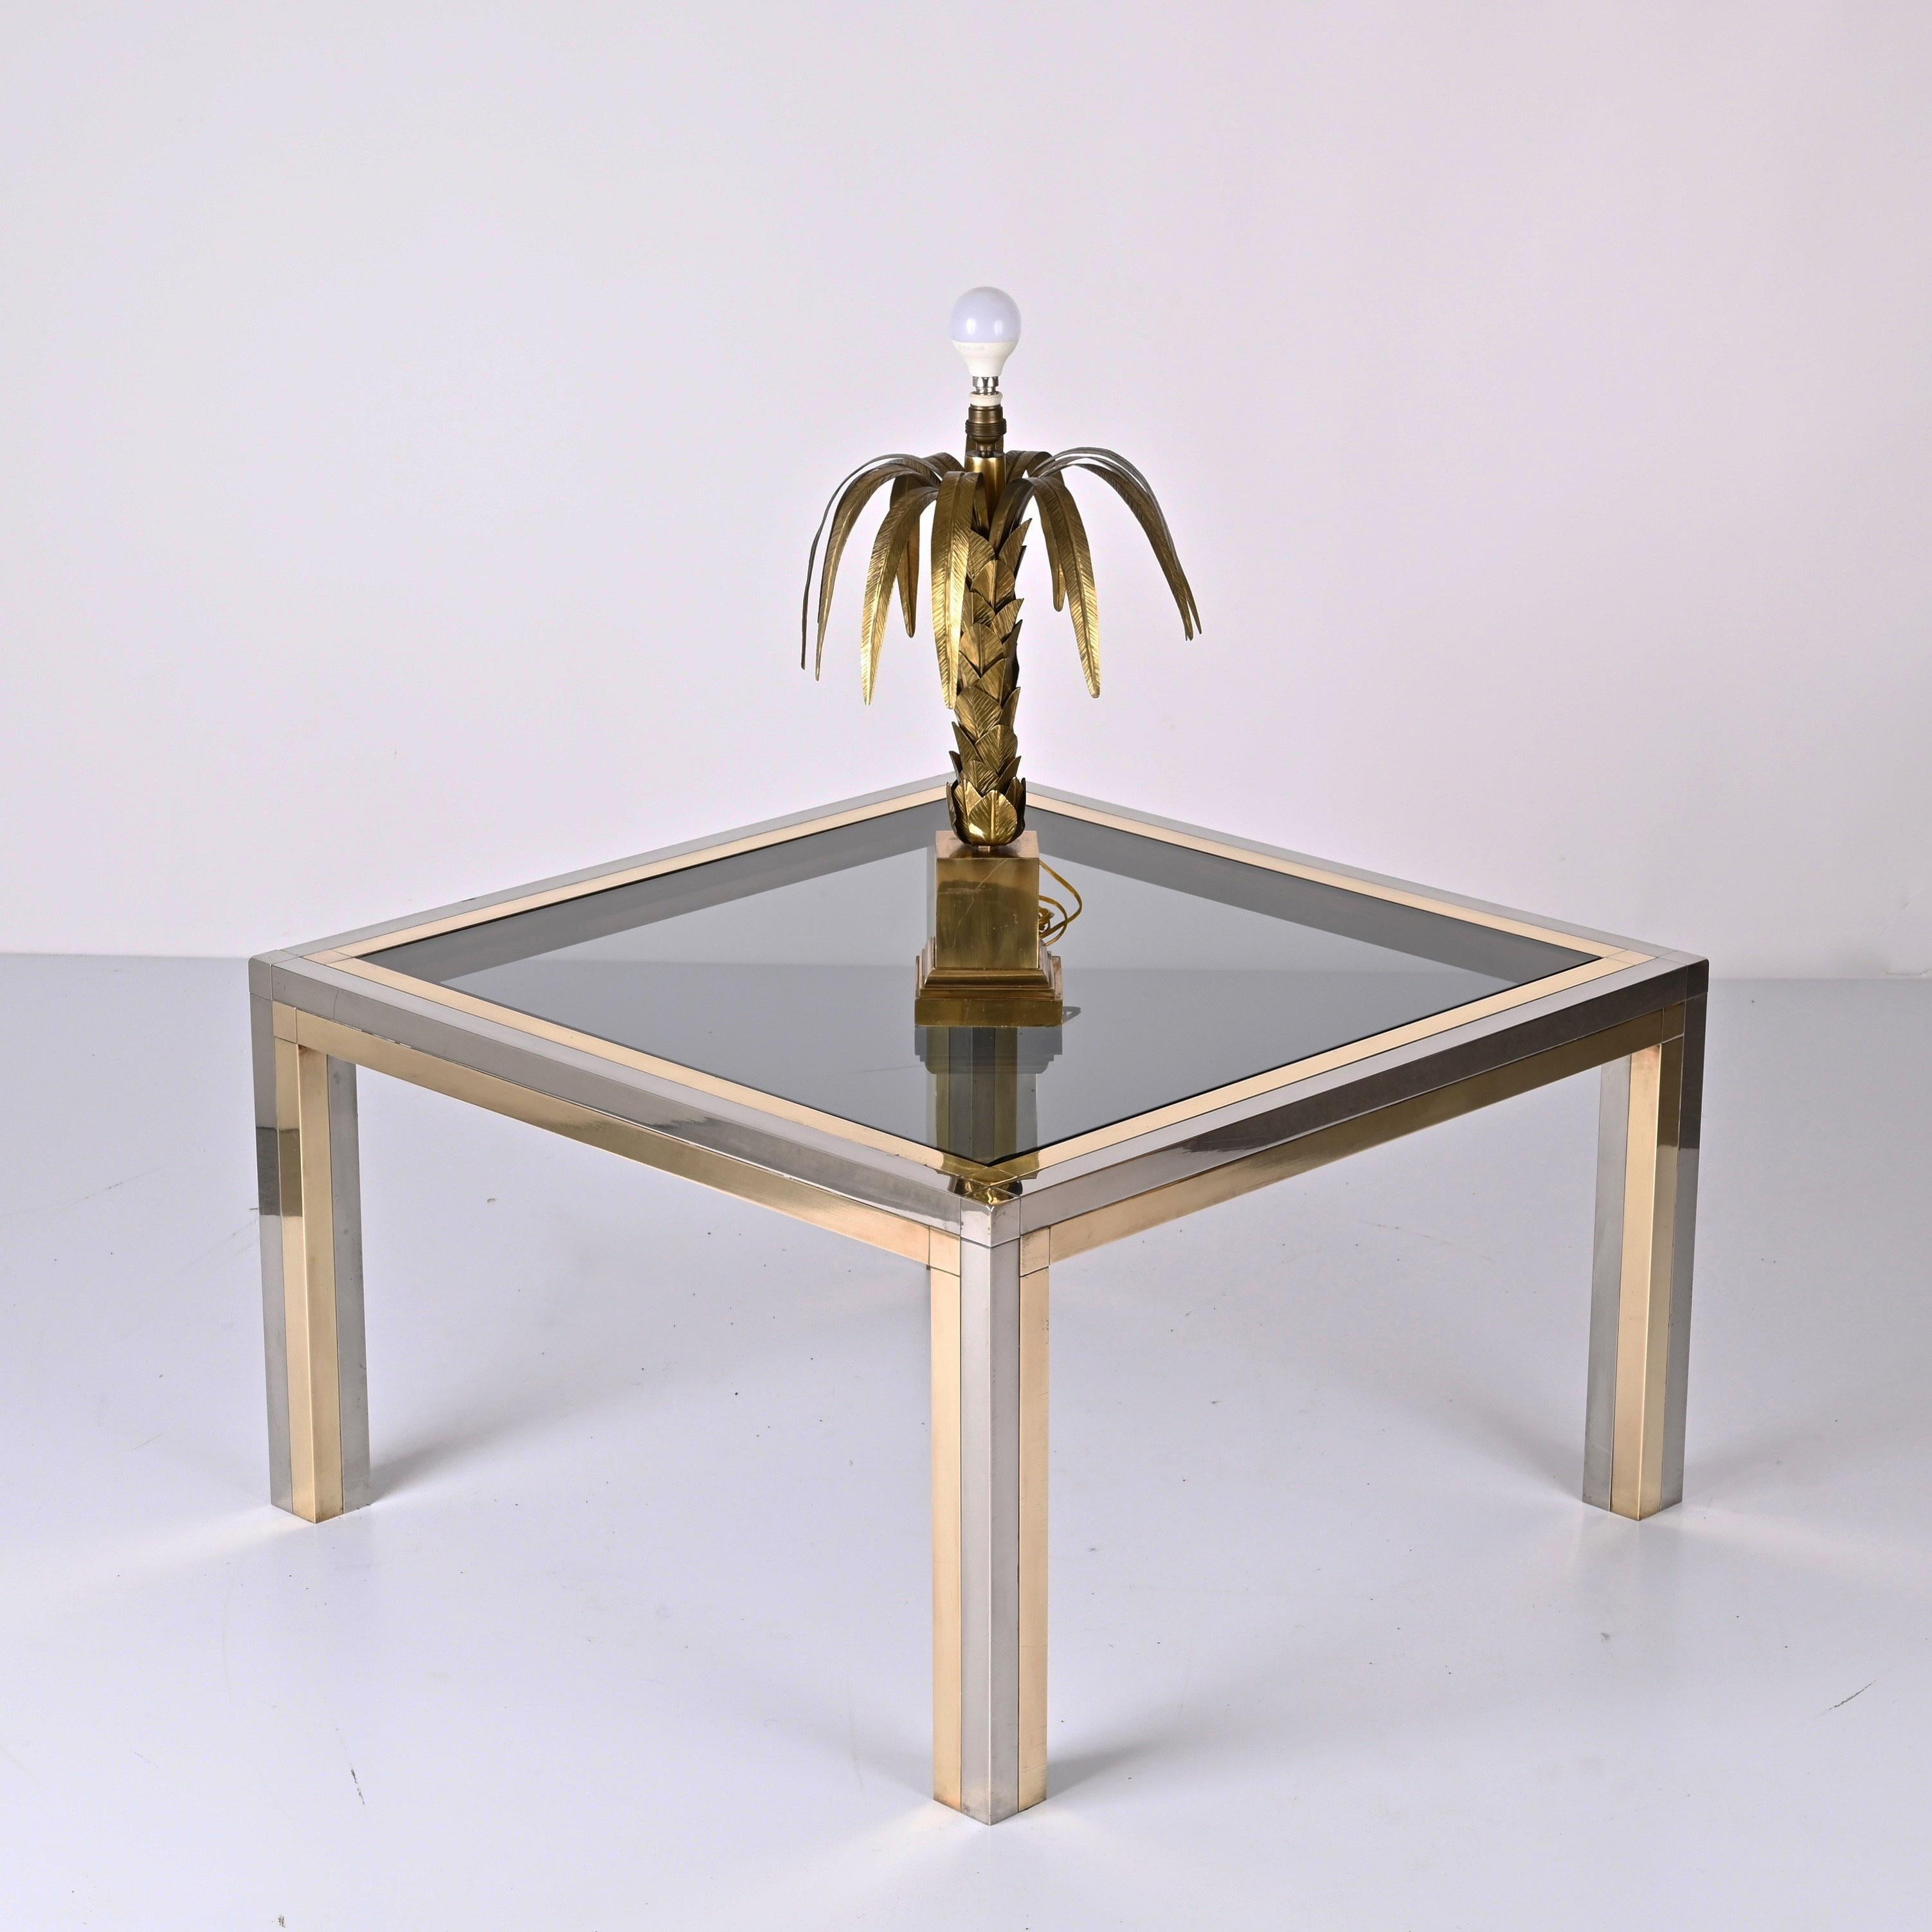 Romeo Rega Brass, Chrome and Smoked Glass Square Italian Coffee Table, 1970s For Sale 9